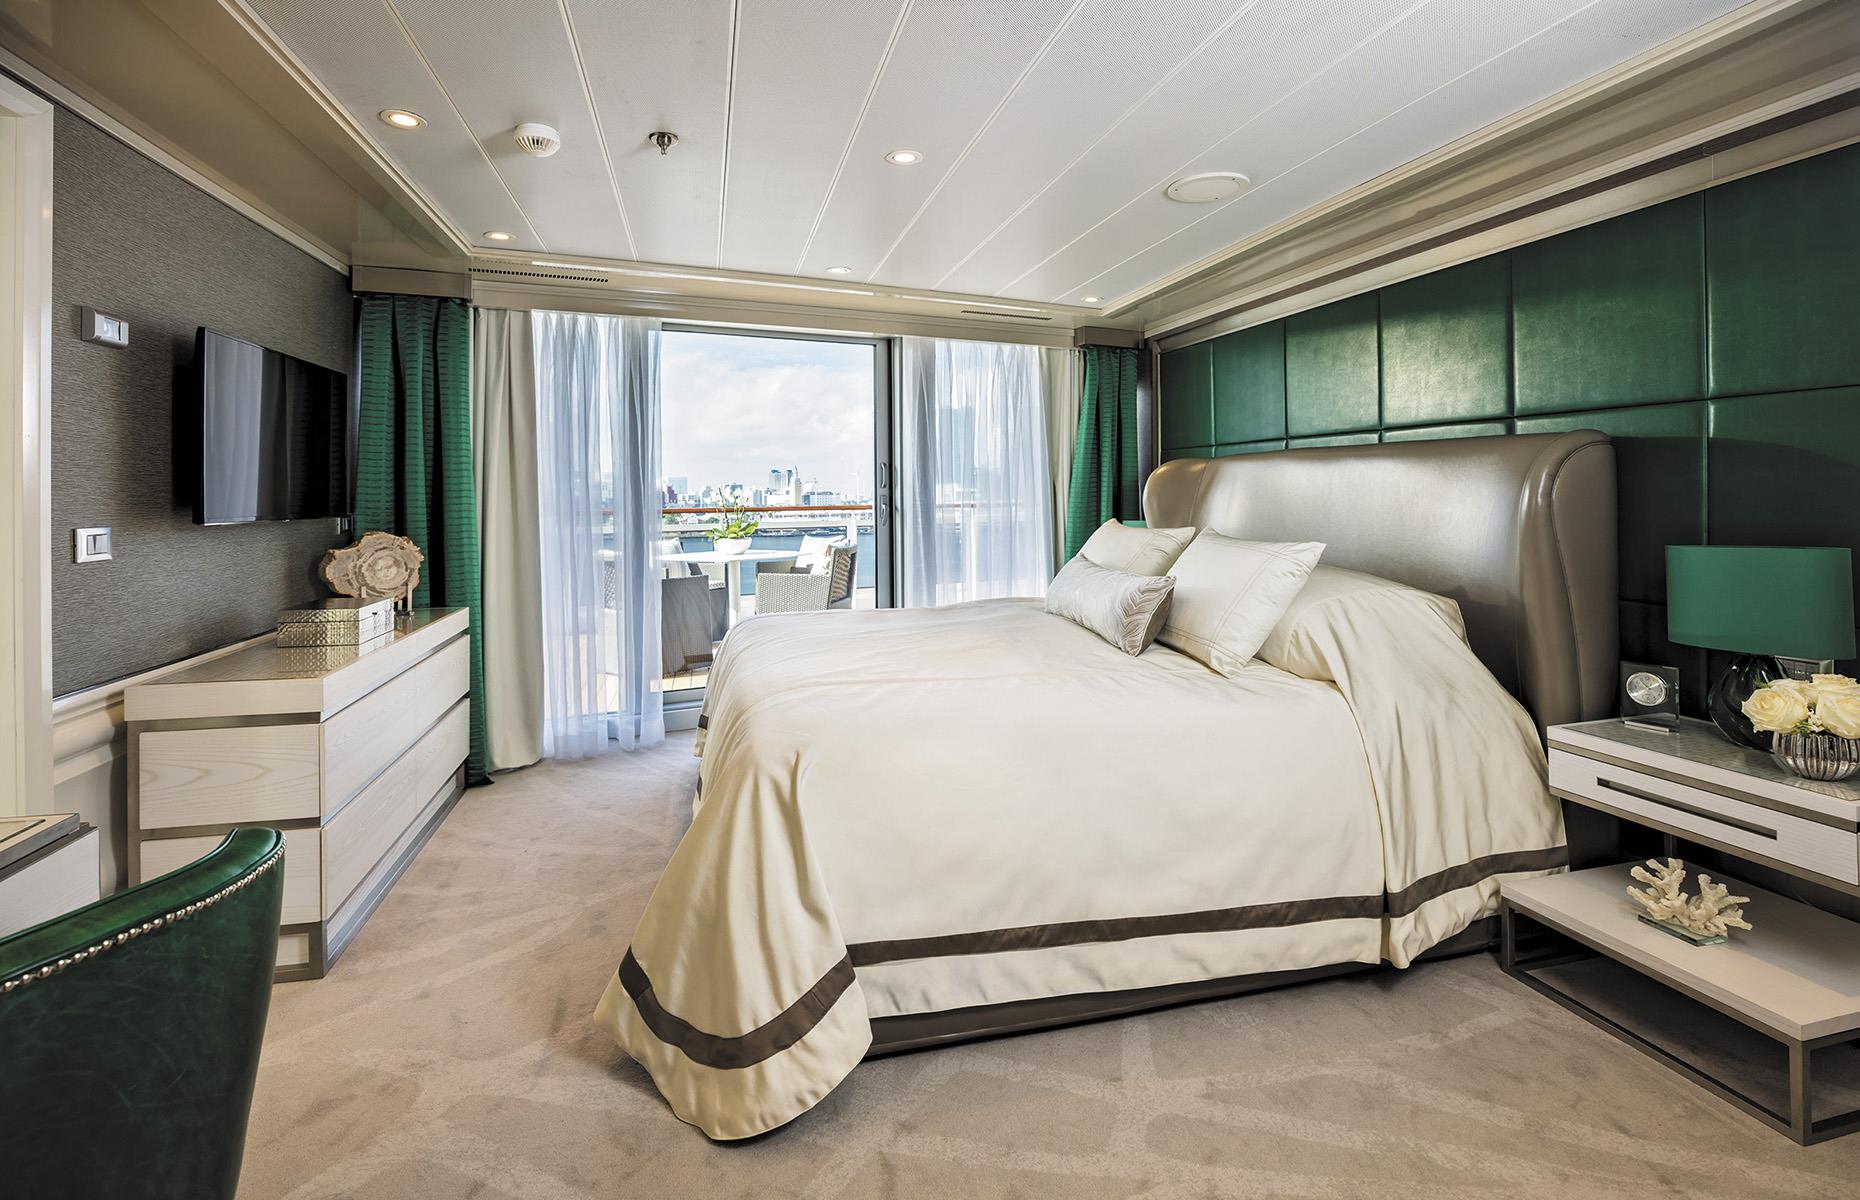 <p>We’re increasingly seeing bigger budgets for ships’ decor. Huge amounts of cash are being splashed on sprucing up interiors, and one example of this decadence is <a href="https://www.rssc.com">Regent Seven Seas Cruises</a>' Seven Seas Explorer, which has 473 Swedish-designed chandeliers, 45,876 square feet (4,262sqm) of marble, Versace-designed dinnerware, crystal glasses from Eastern Europe and a $12 million art collection which includes several Picassos.</p>